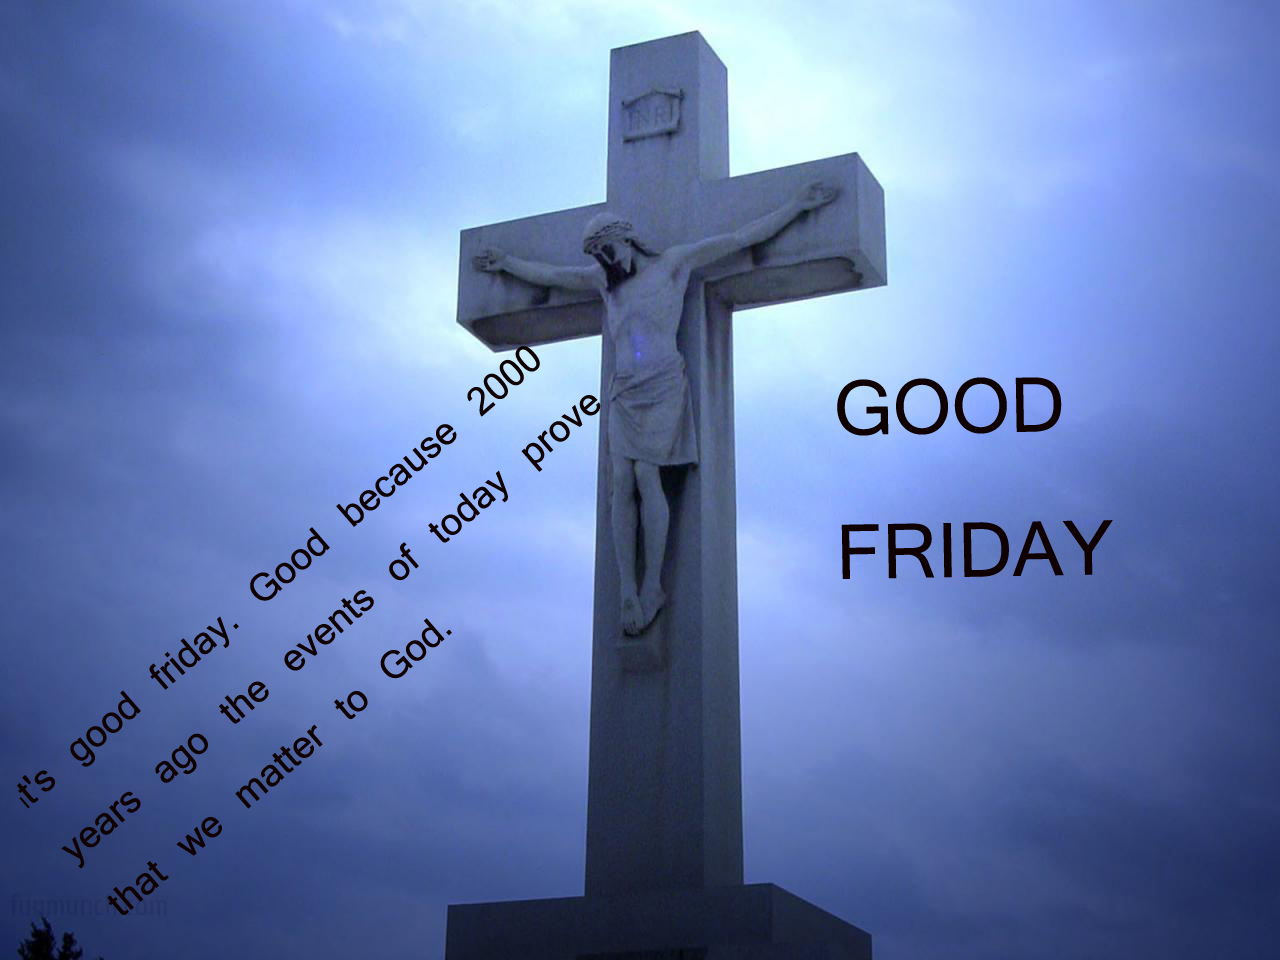 Cute Good Friday {HD} Wallpapers Pictures - USA Festival Holidays